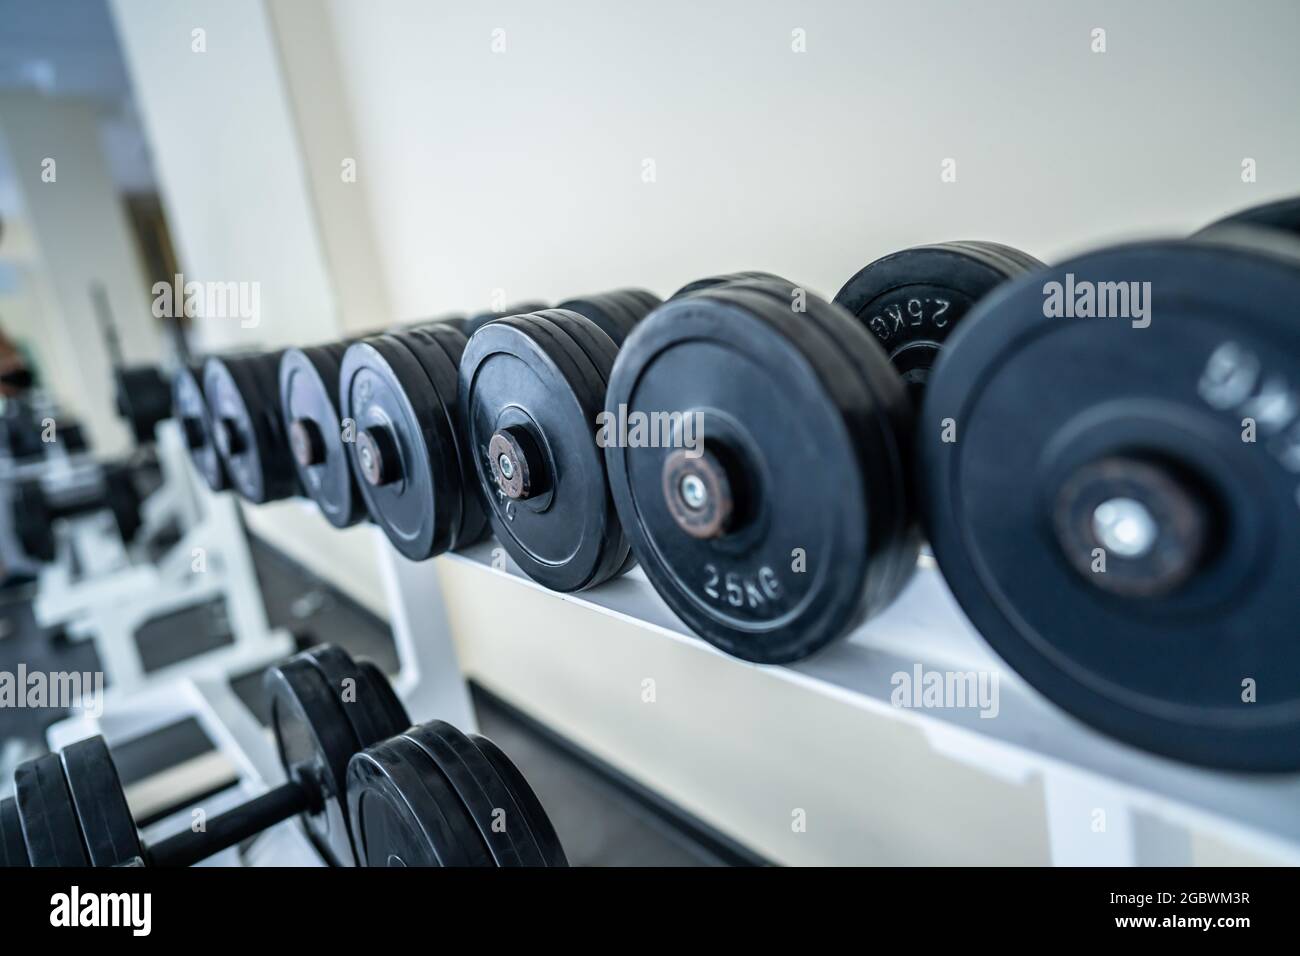 Gym Training Various Iron And Sport Workout Weights Collection Stock Photo